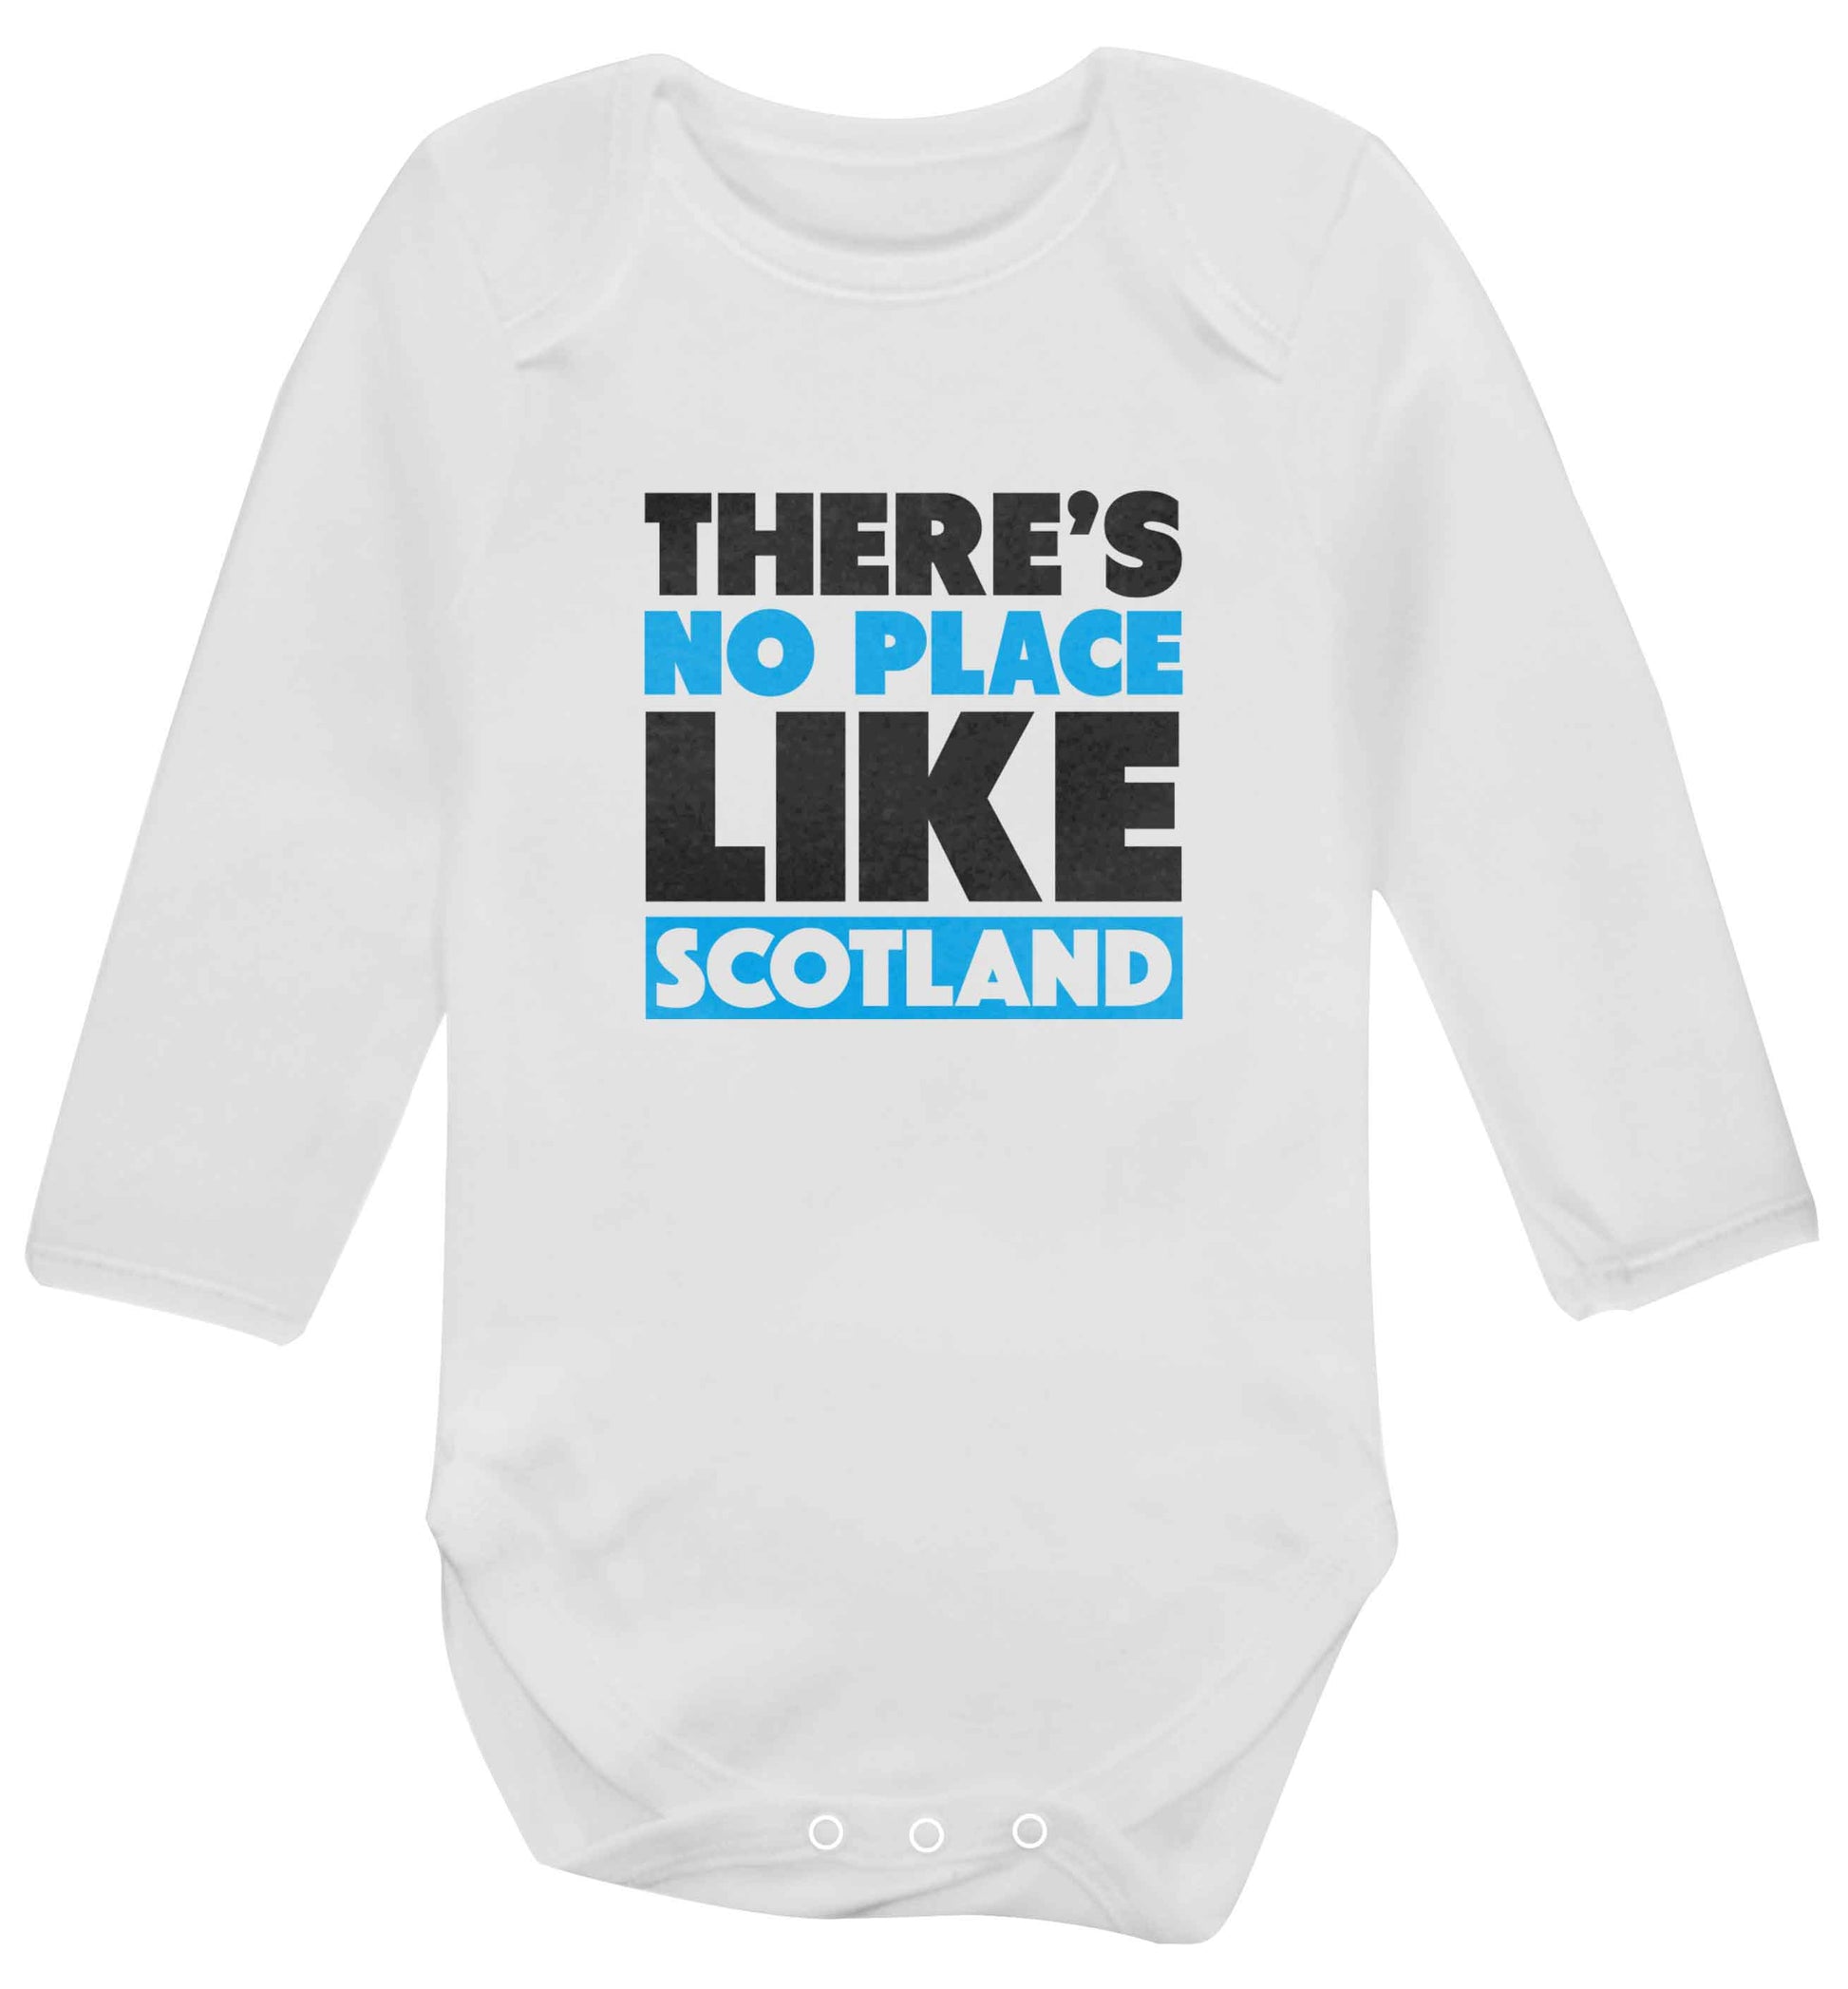 There's no place like Scotland baby vest long sleeved white 6-12 months